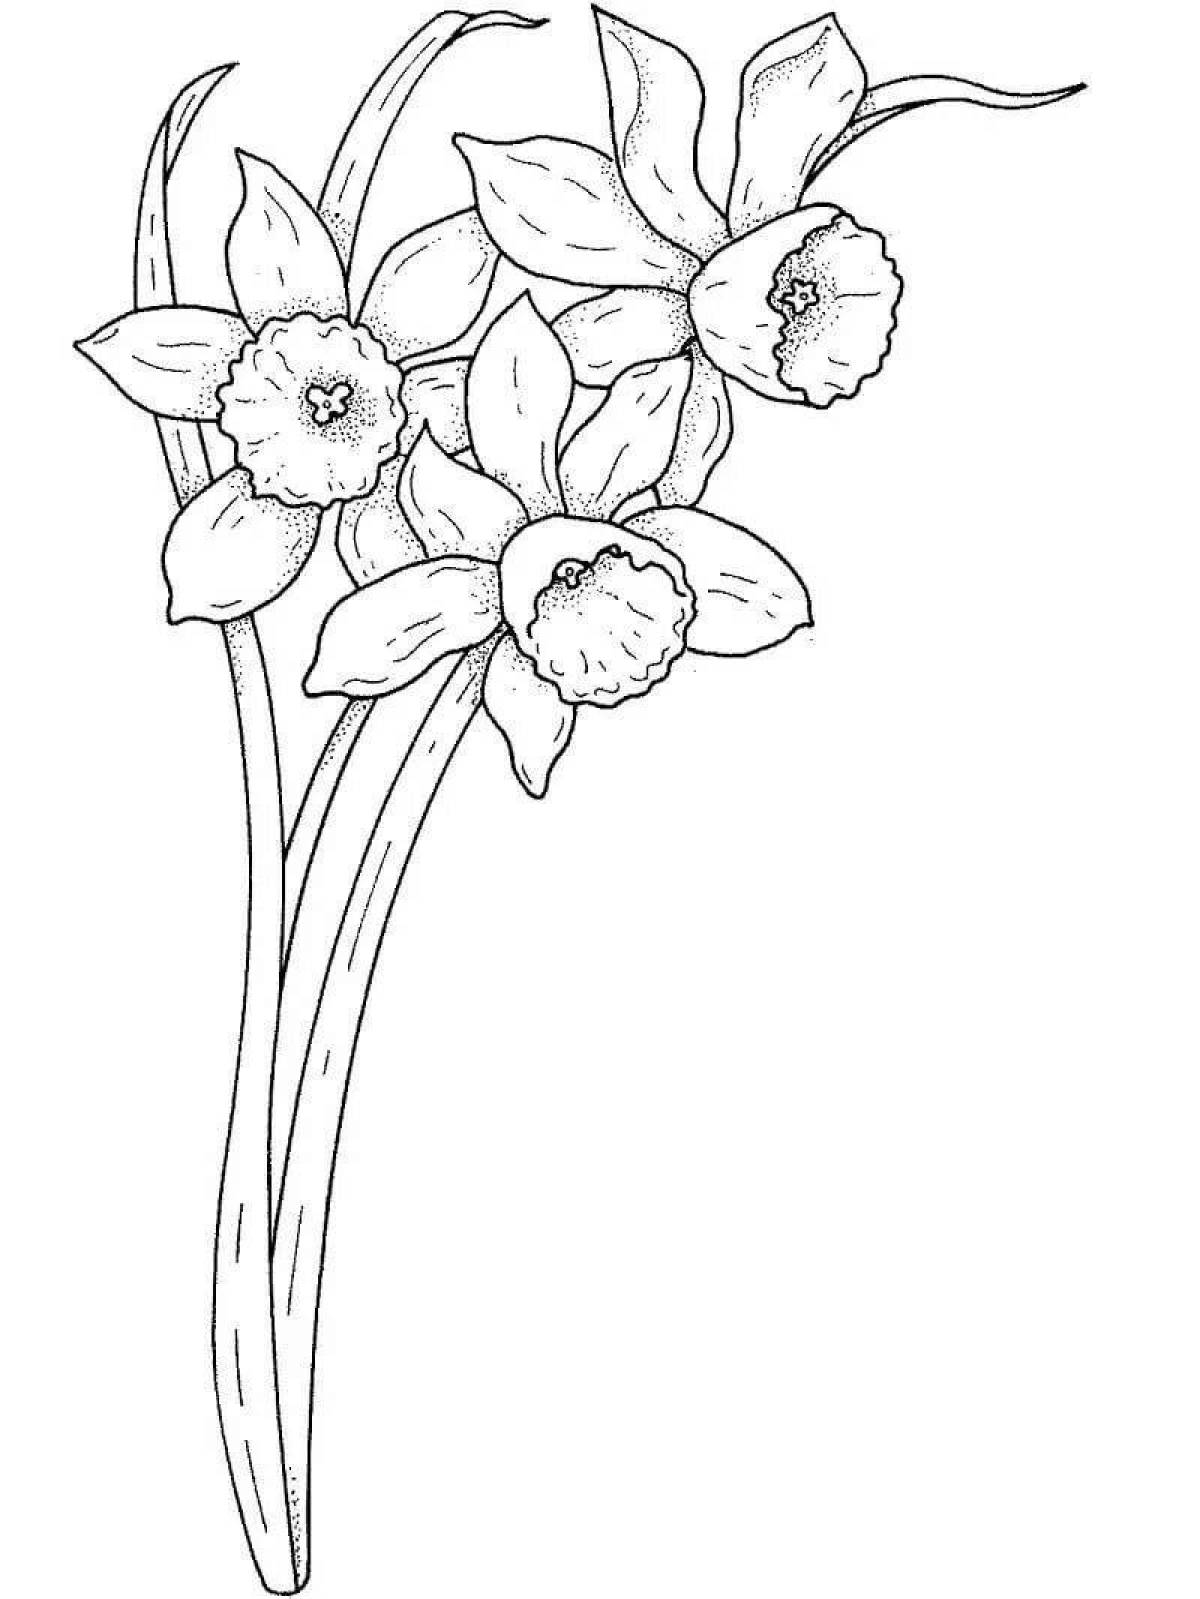 Coloring book magic narcissus flower